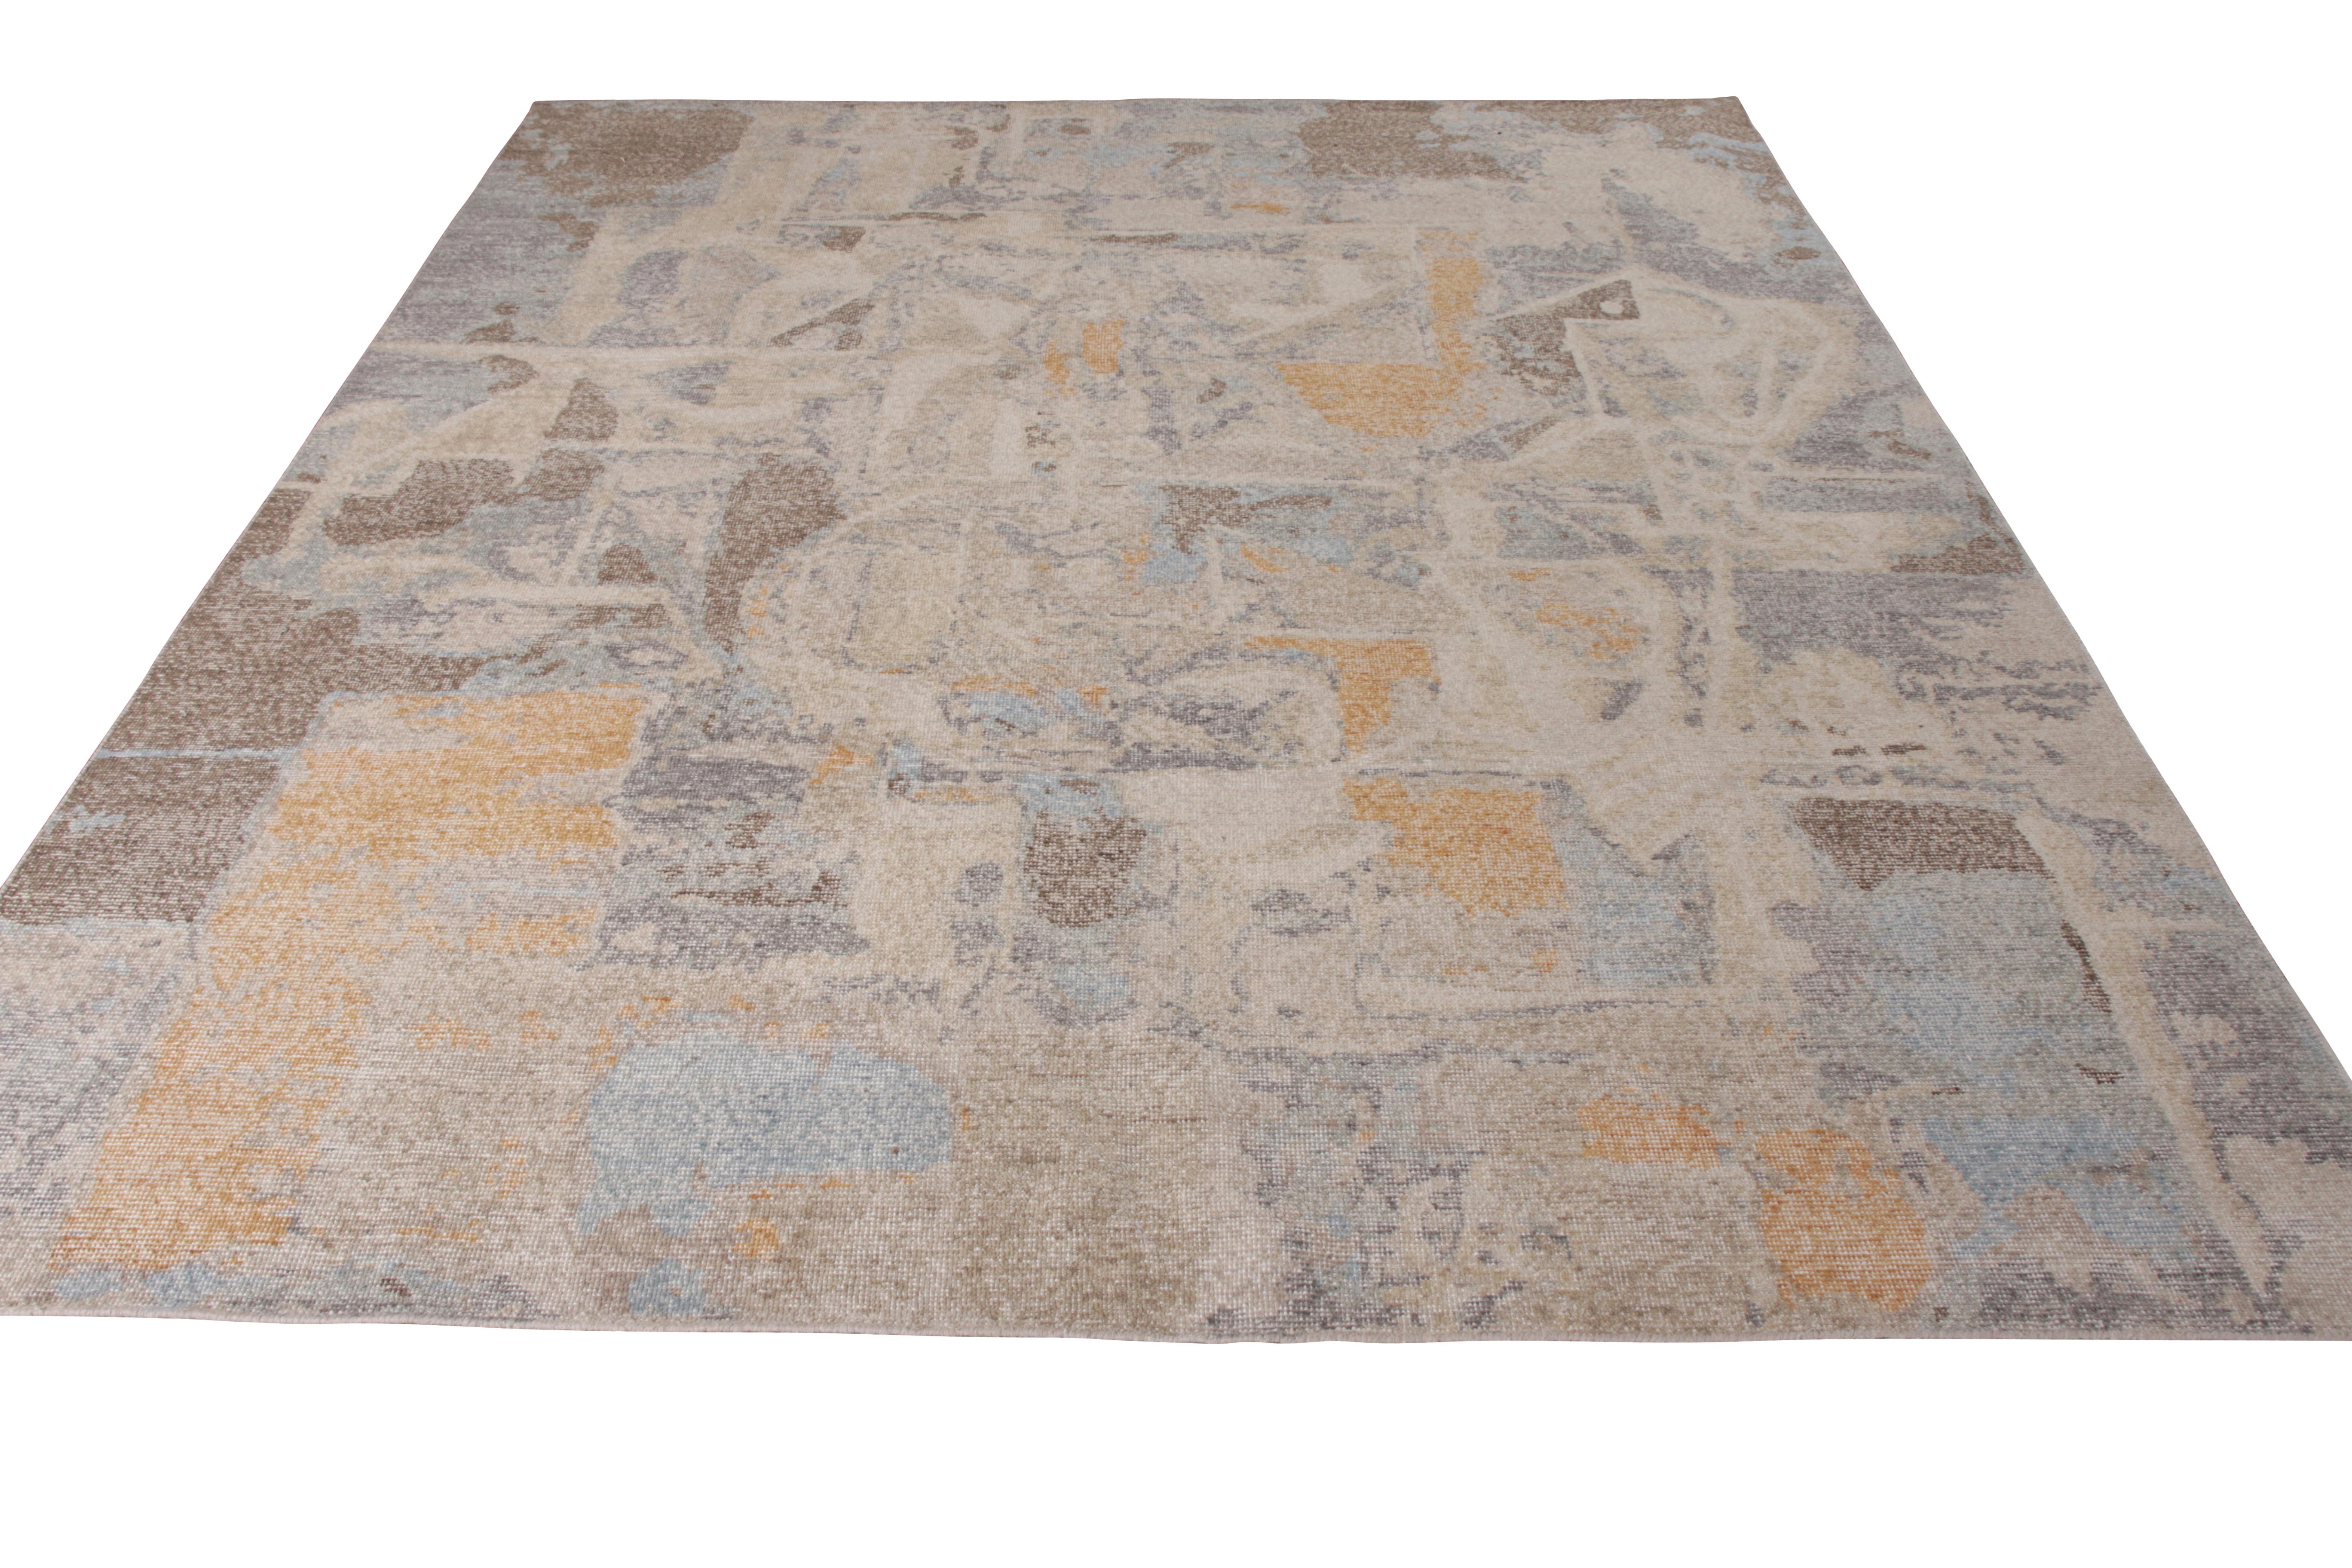 An 8 x 10 take on abstract modern rug styles in beige-brown and blue, from Rug & Kilim’s Homage Collection. Hand knotted in wool, reimagining a shabby-chic distressed texture through a comfortable wash unique to this style. 

On the design: This